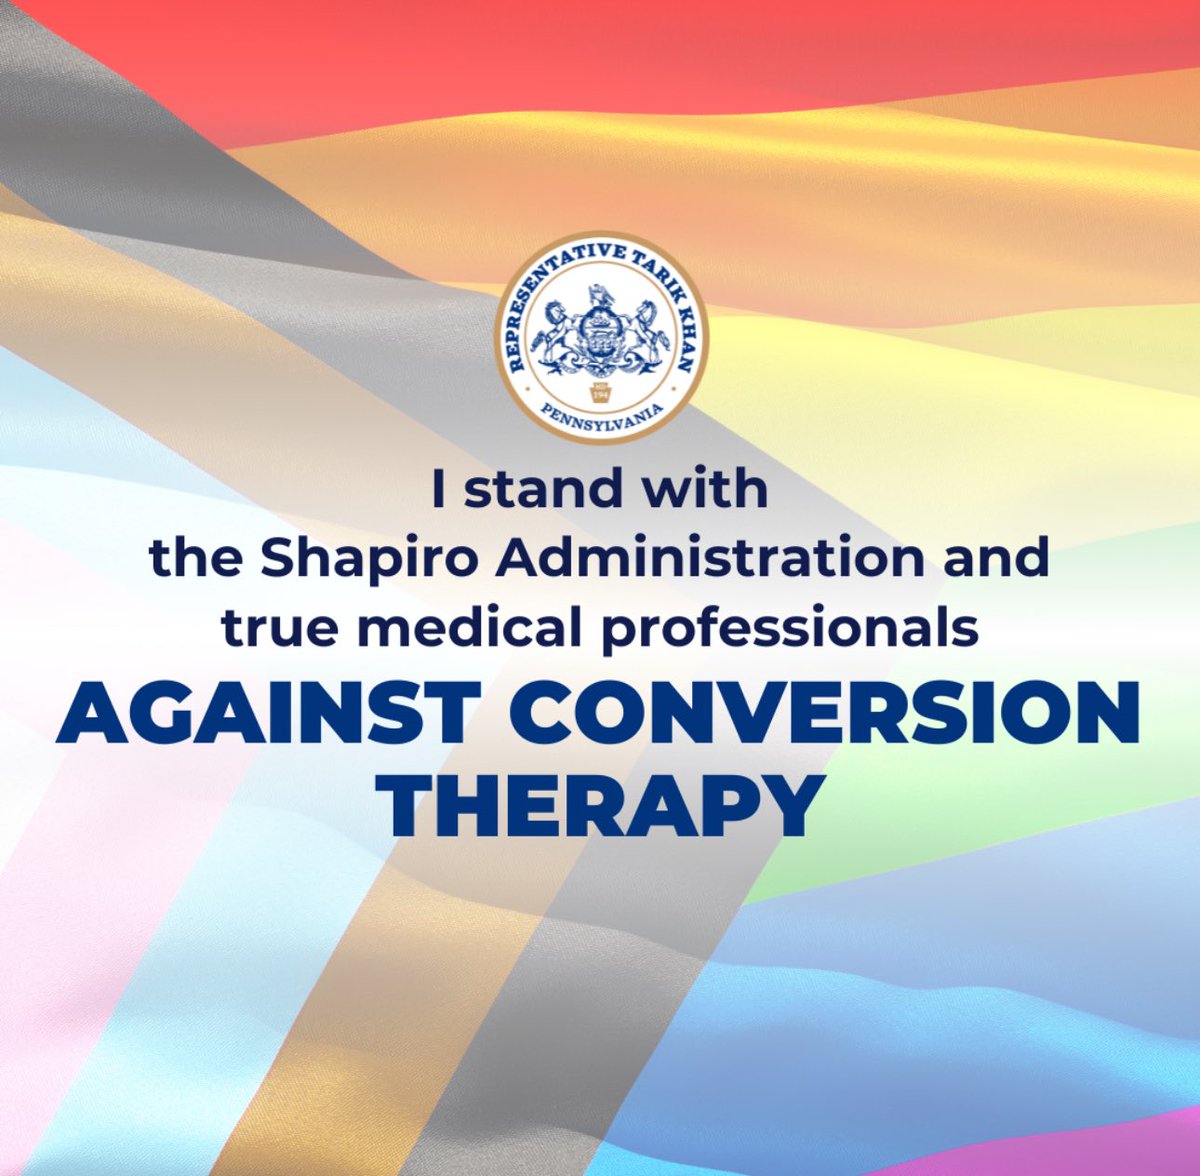 As a healthcare professional, I know “conversion therapy” is harmful and bogus, rooted in homophobia & bigotry.